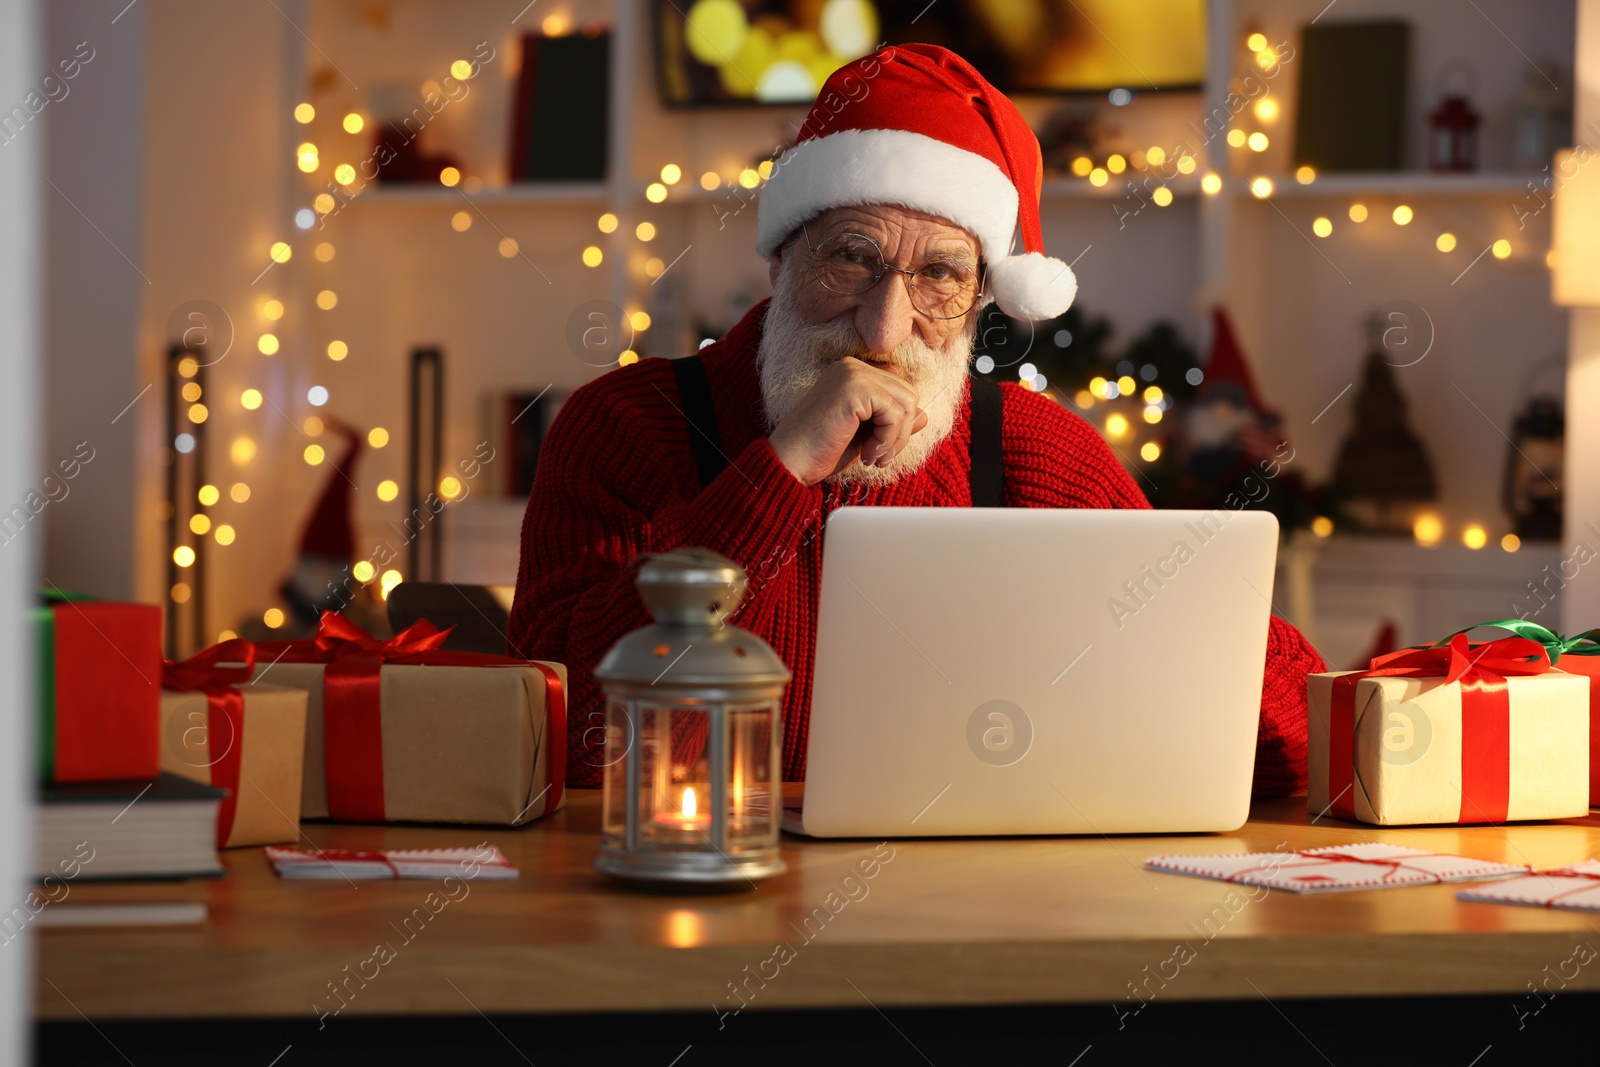 Photo of Santa Claus using laptop at his workplace in room decorated for Christmas